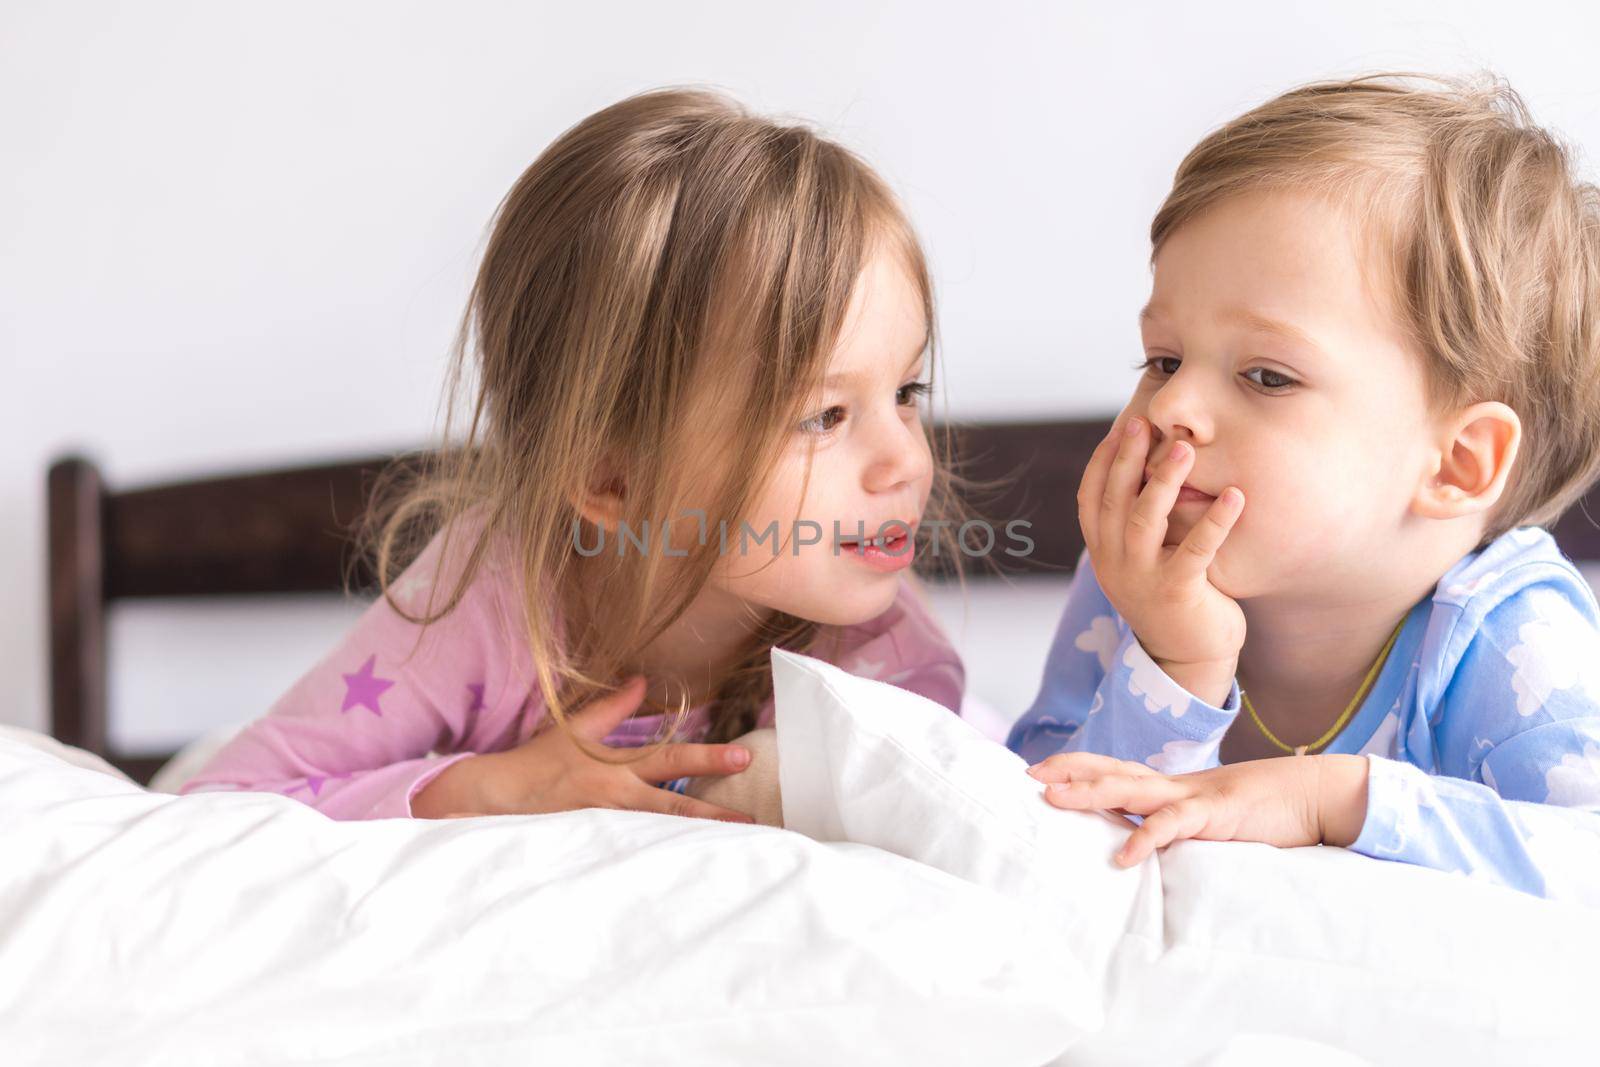 Little Preschool Toddler Minor Children Siblings Kids Watch Cartoon Use Smartphone Phone Device Together. Baby In Pajama On White Bed At Home Bedroom. Family, Leisure, Childhood, Friendship Concept.